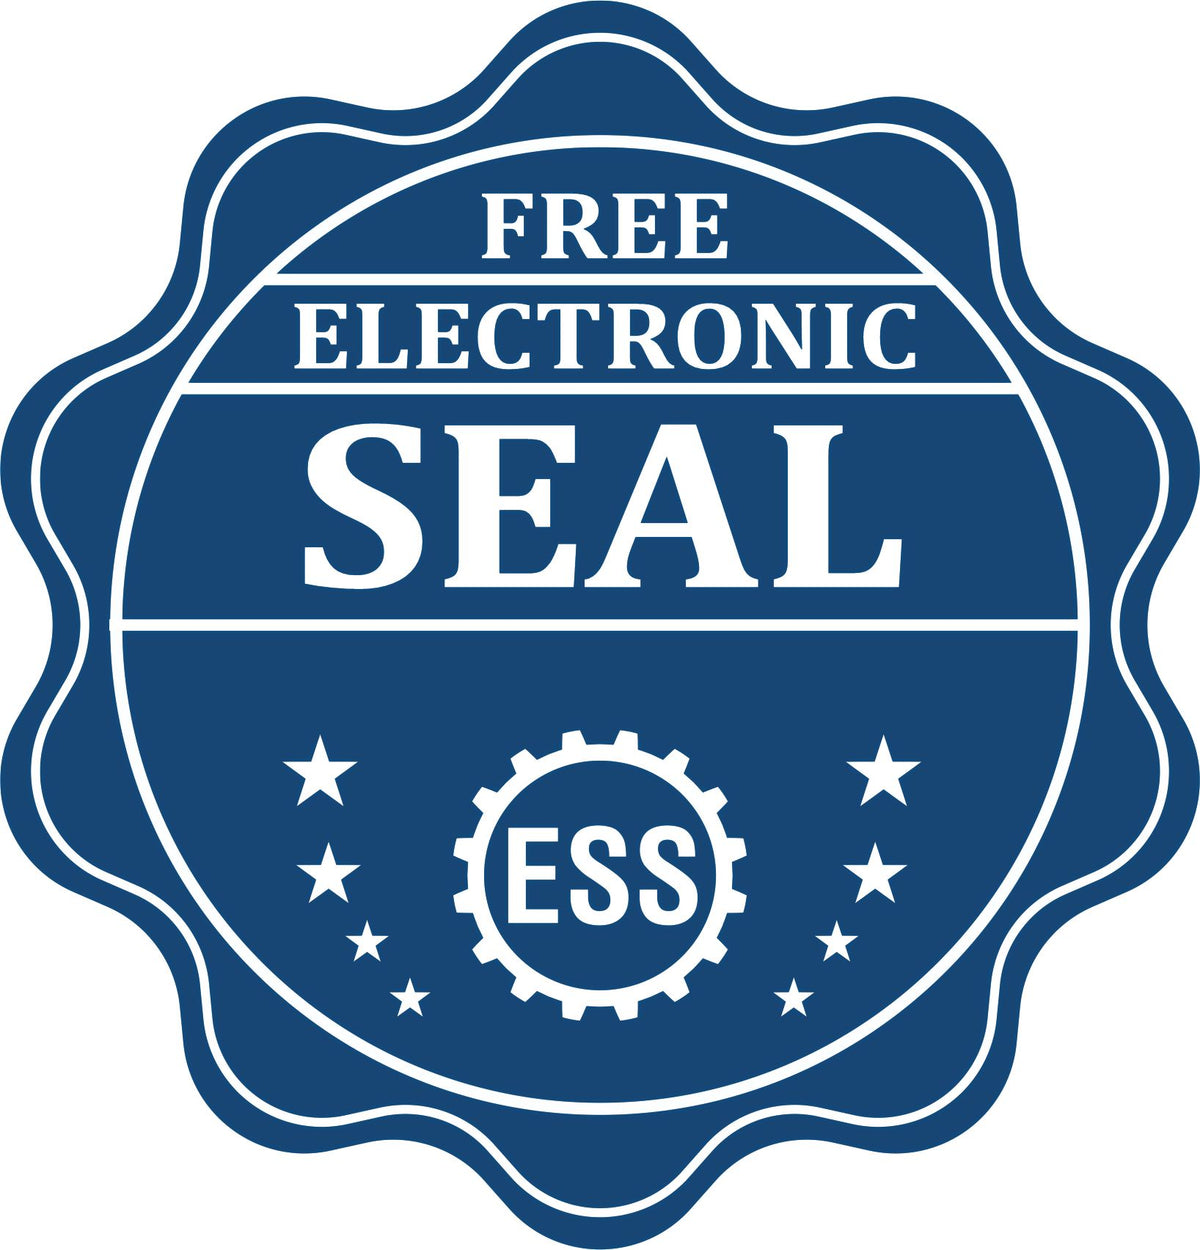 A badge showing a free electronic seal for the Long Reach Nebraska Land Surveyor Seal with stars and the ESS gear on the emblem.